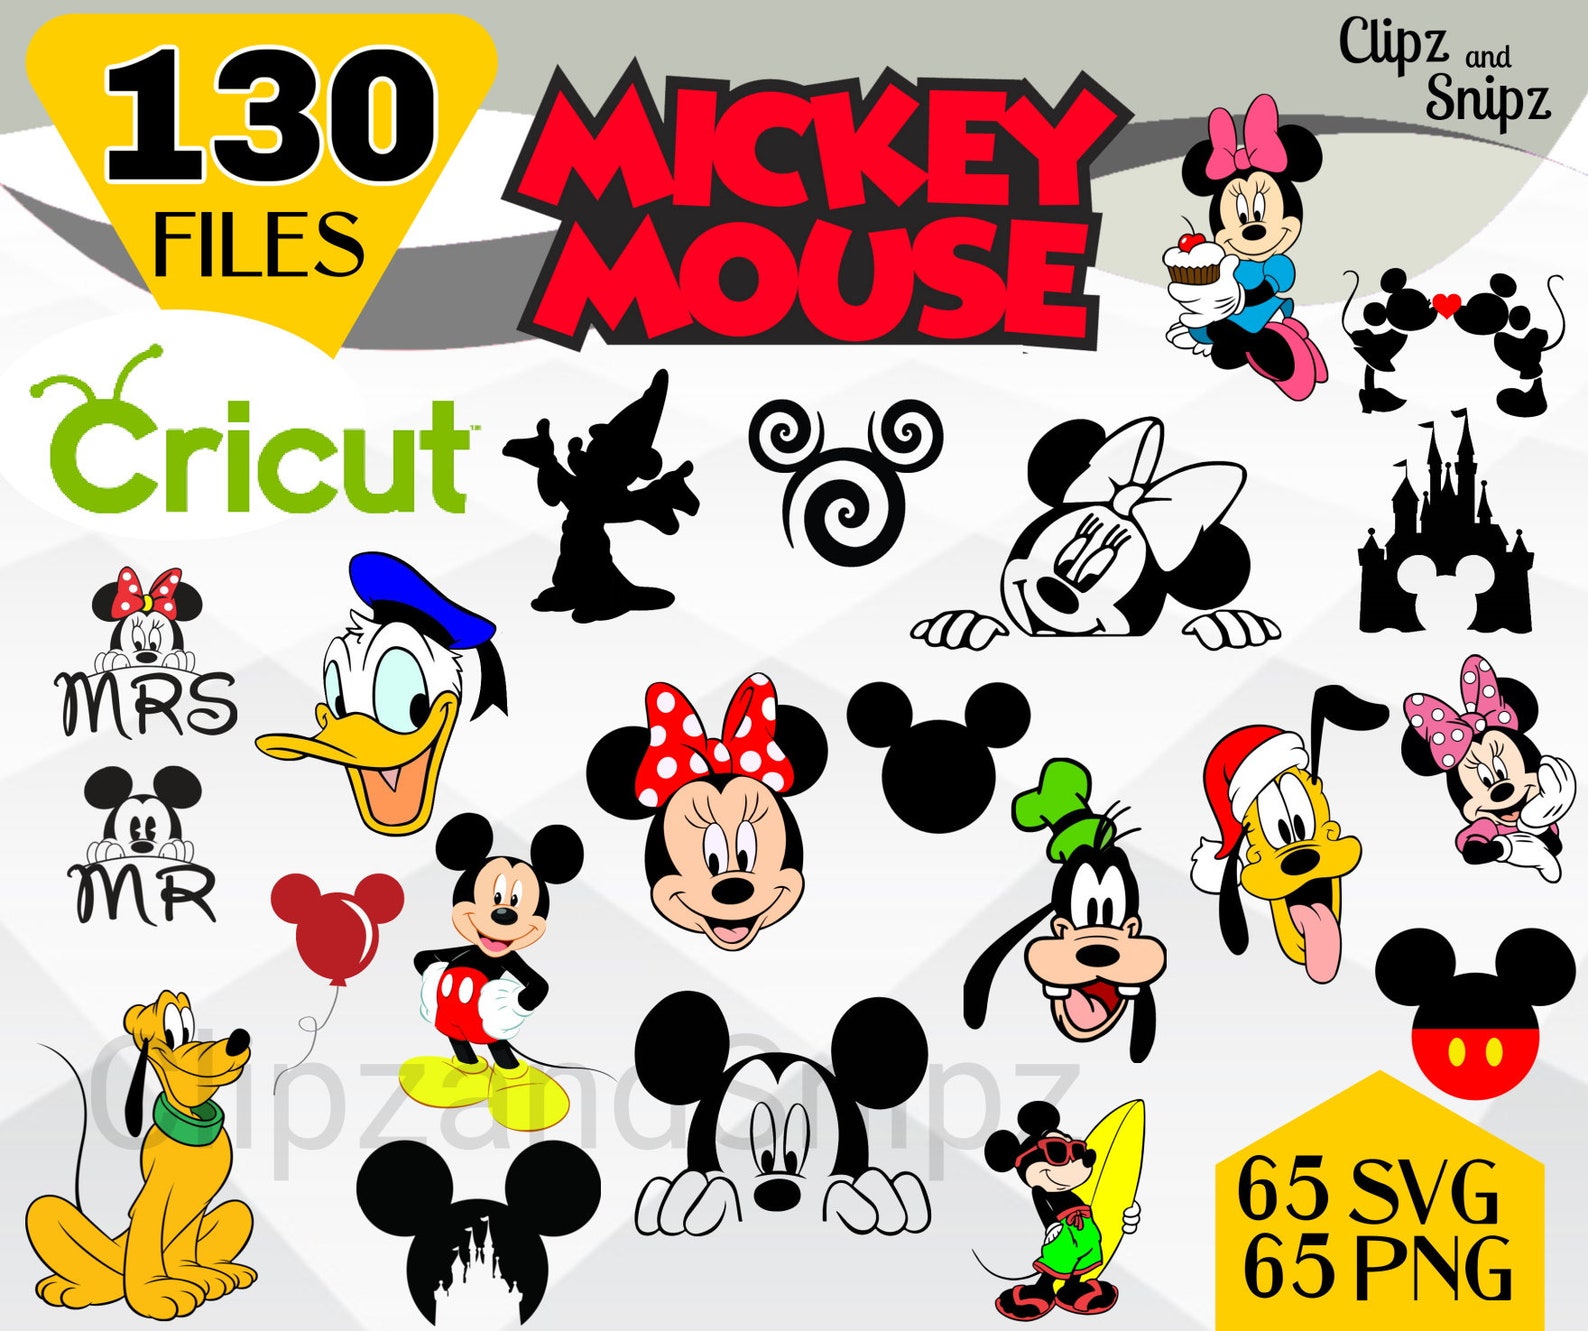 Big files with Mickey Mouse illustrations.